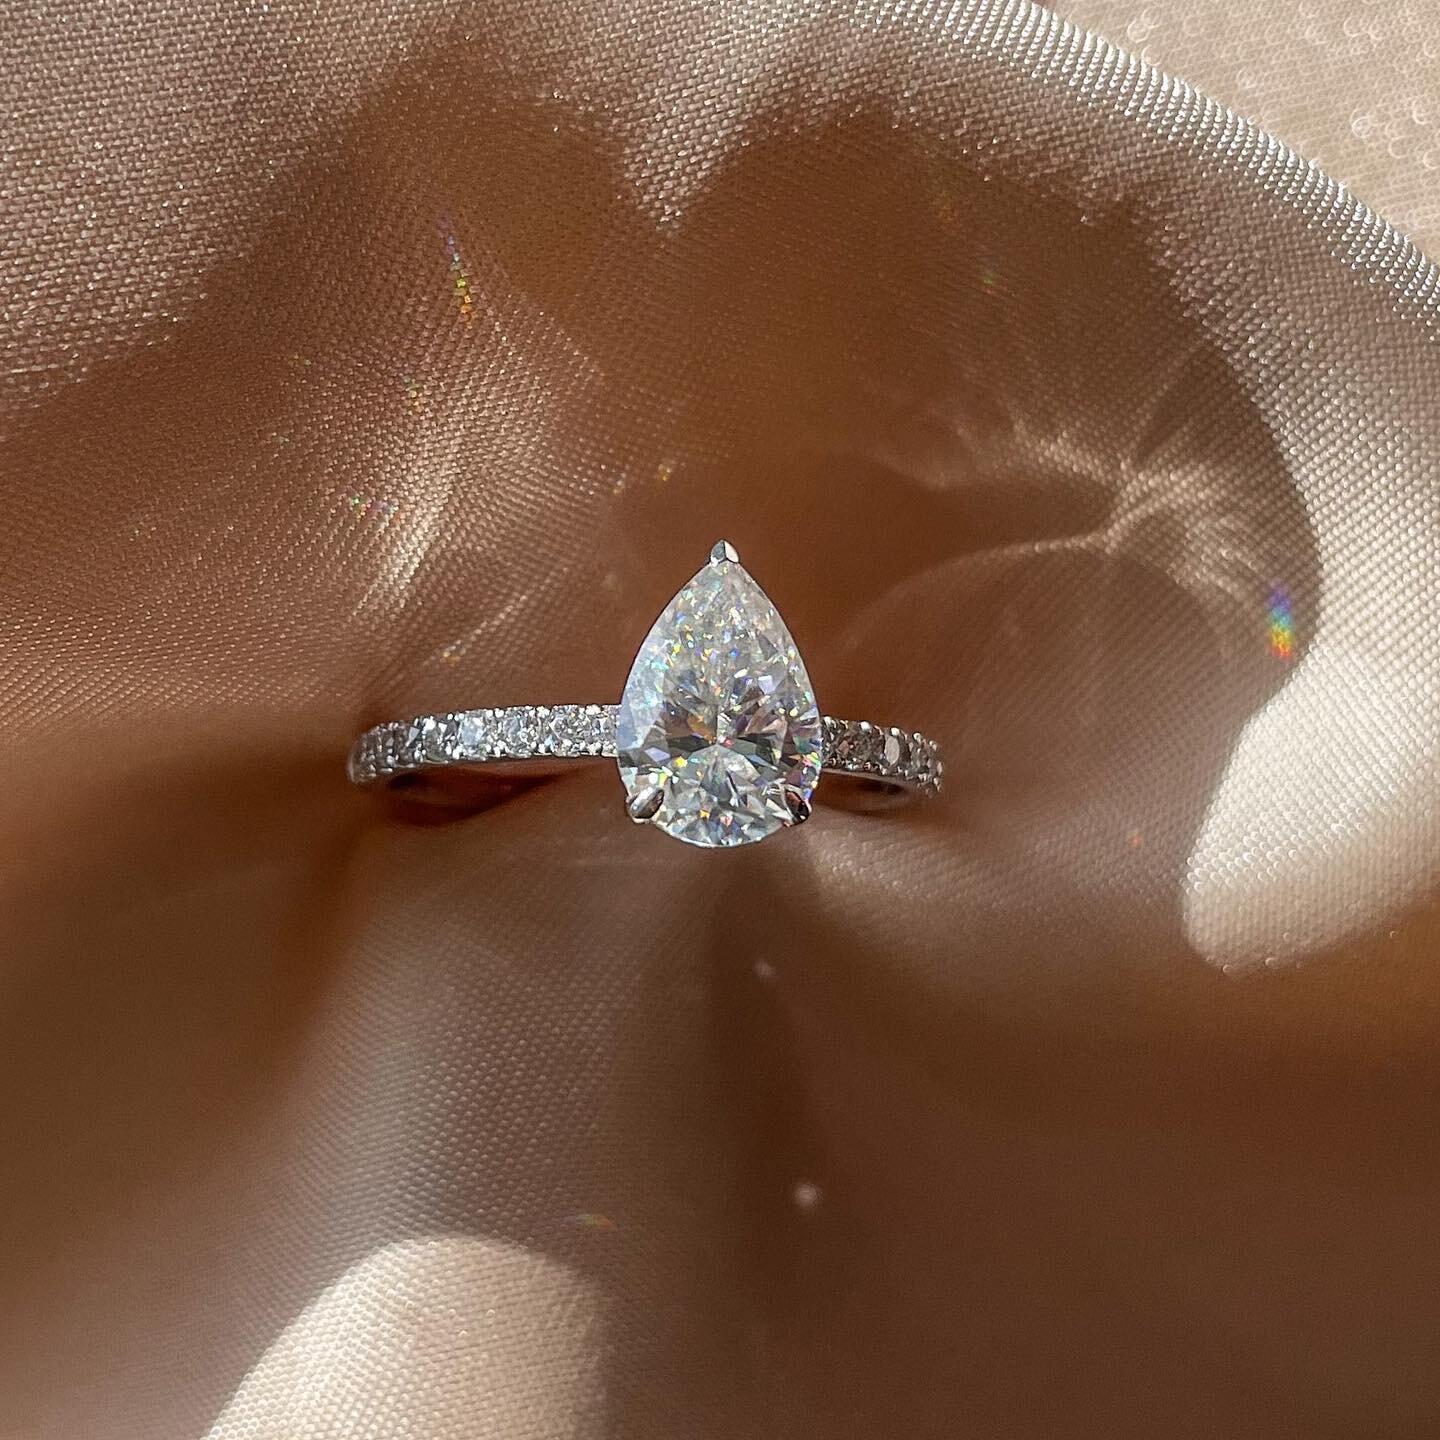 Our beautiful pear cut with a 3/4 pav&eacute; band crafted in 18K white gold ✨ #gracemariejewellery 

&mdash;&mdash;&mdash;&mdash;&mdash;&mdash;&mdash;&mdash;&mdash;&mdash;&mdash;&mdash;&mdash;&mdash;&mdash;&mdash;&mdash;&mdash;

- 7x10mm (2ct) Pear 